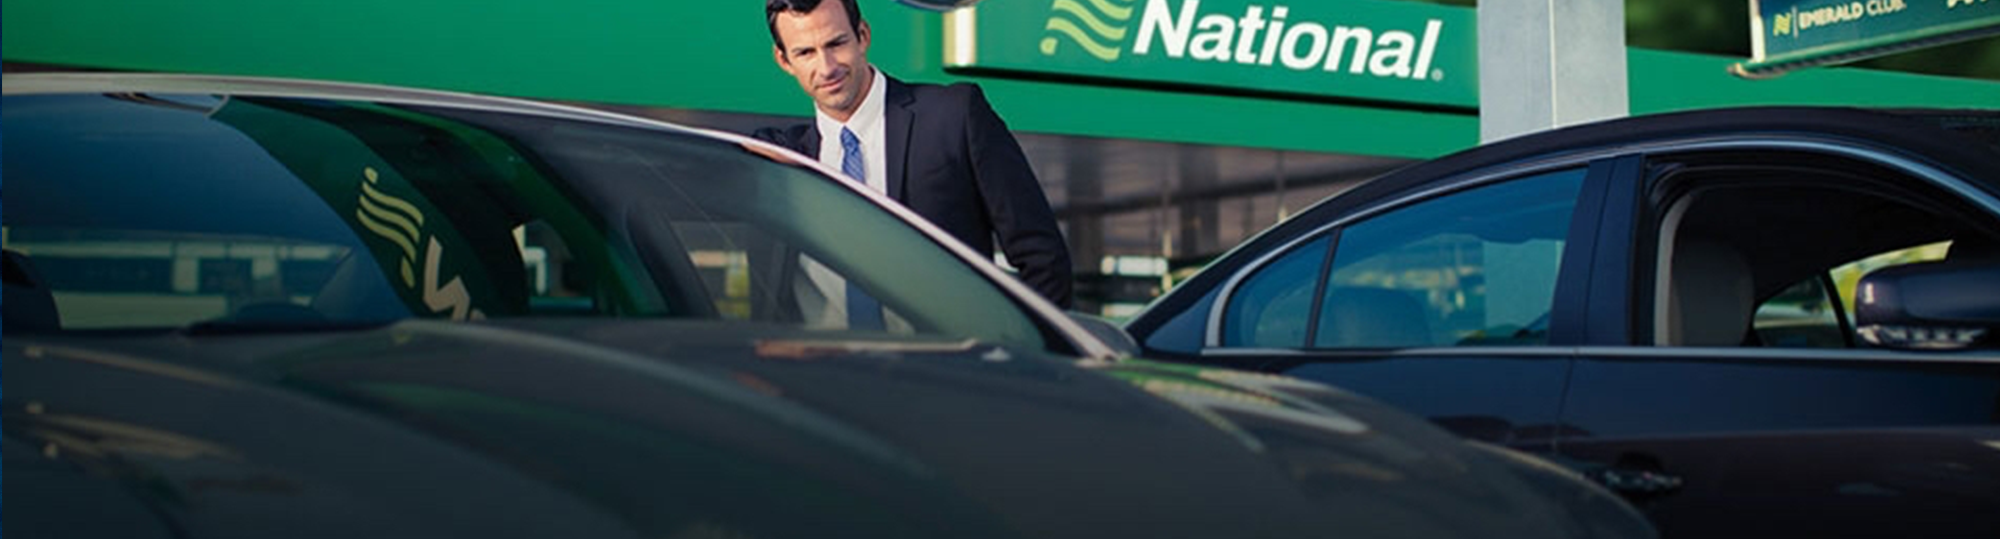 National Car Rental Military Discount with Veterans Advantage